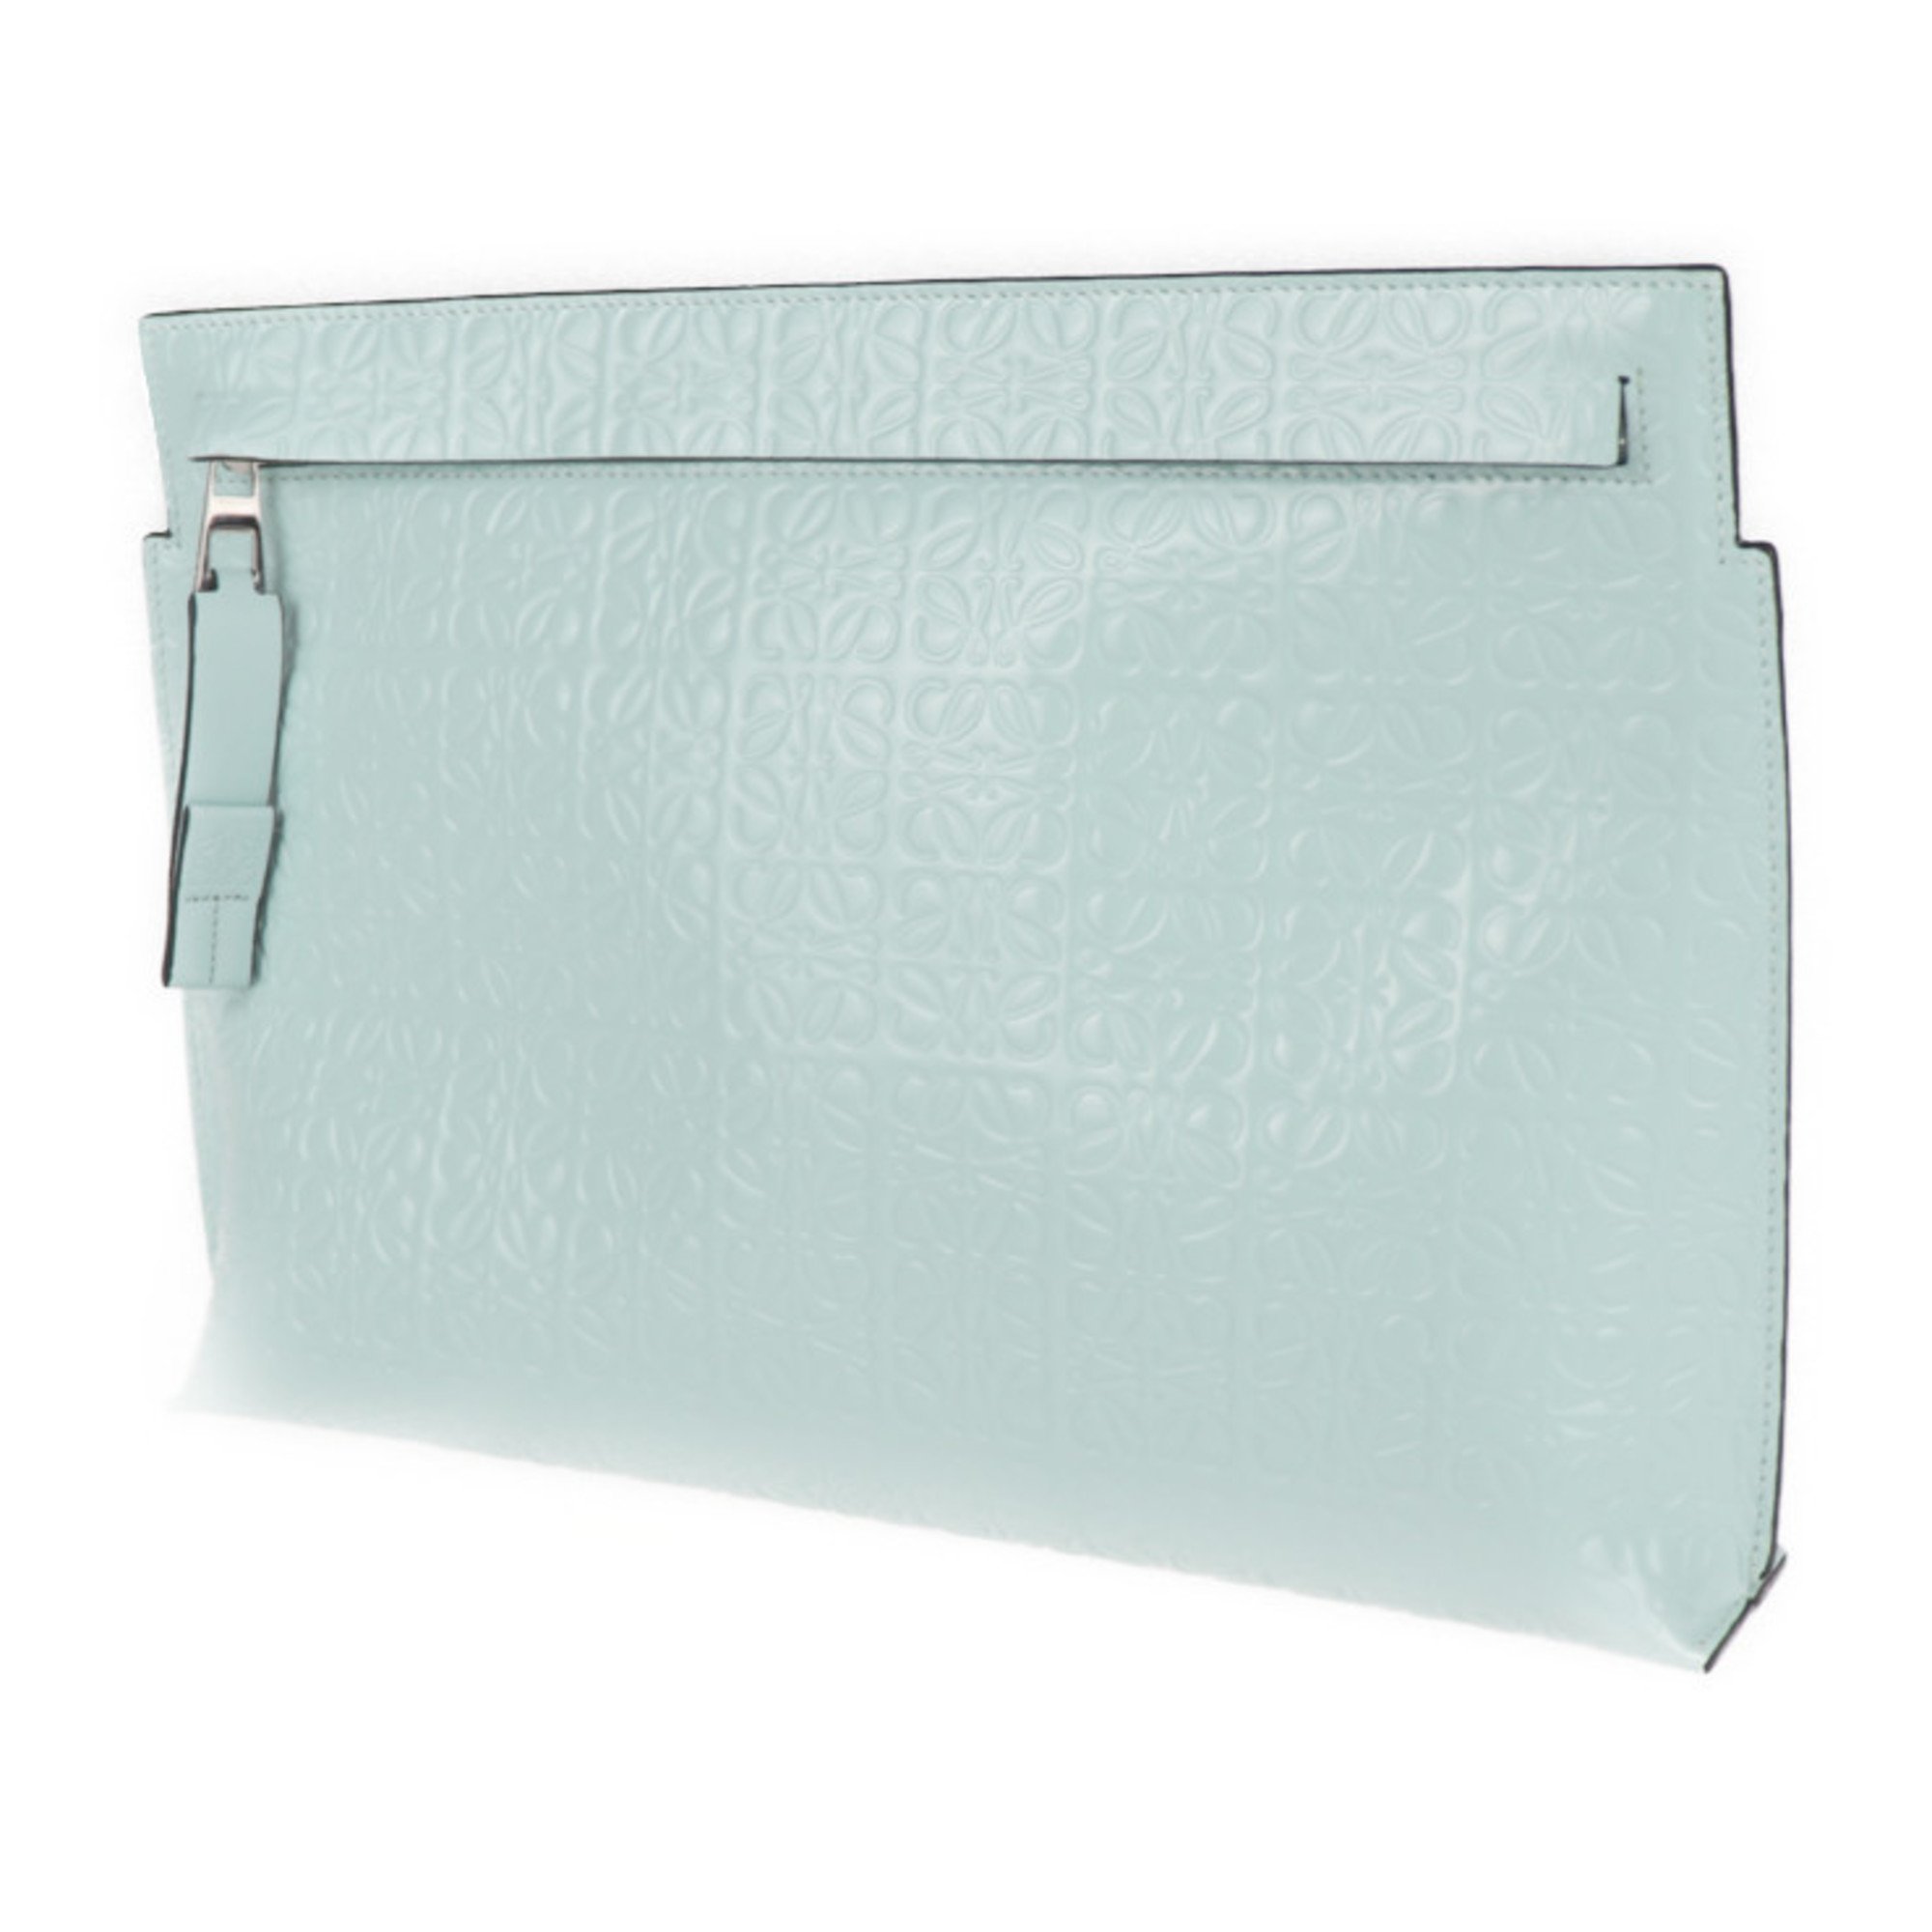 LOEWE Loewe T Pouch Repeat Anagram Clutch Bag 109.10GW05 Patent Leather Light Blue